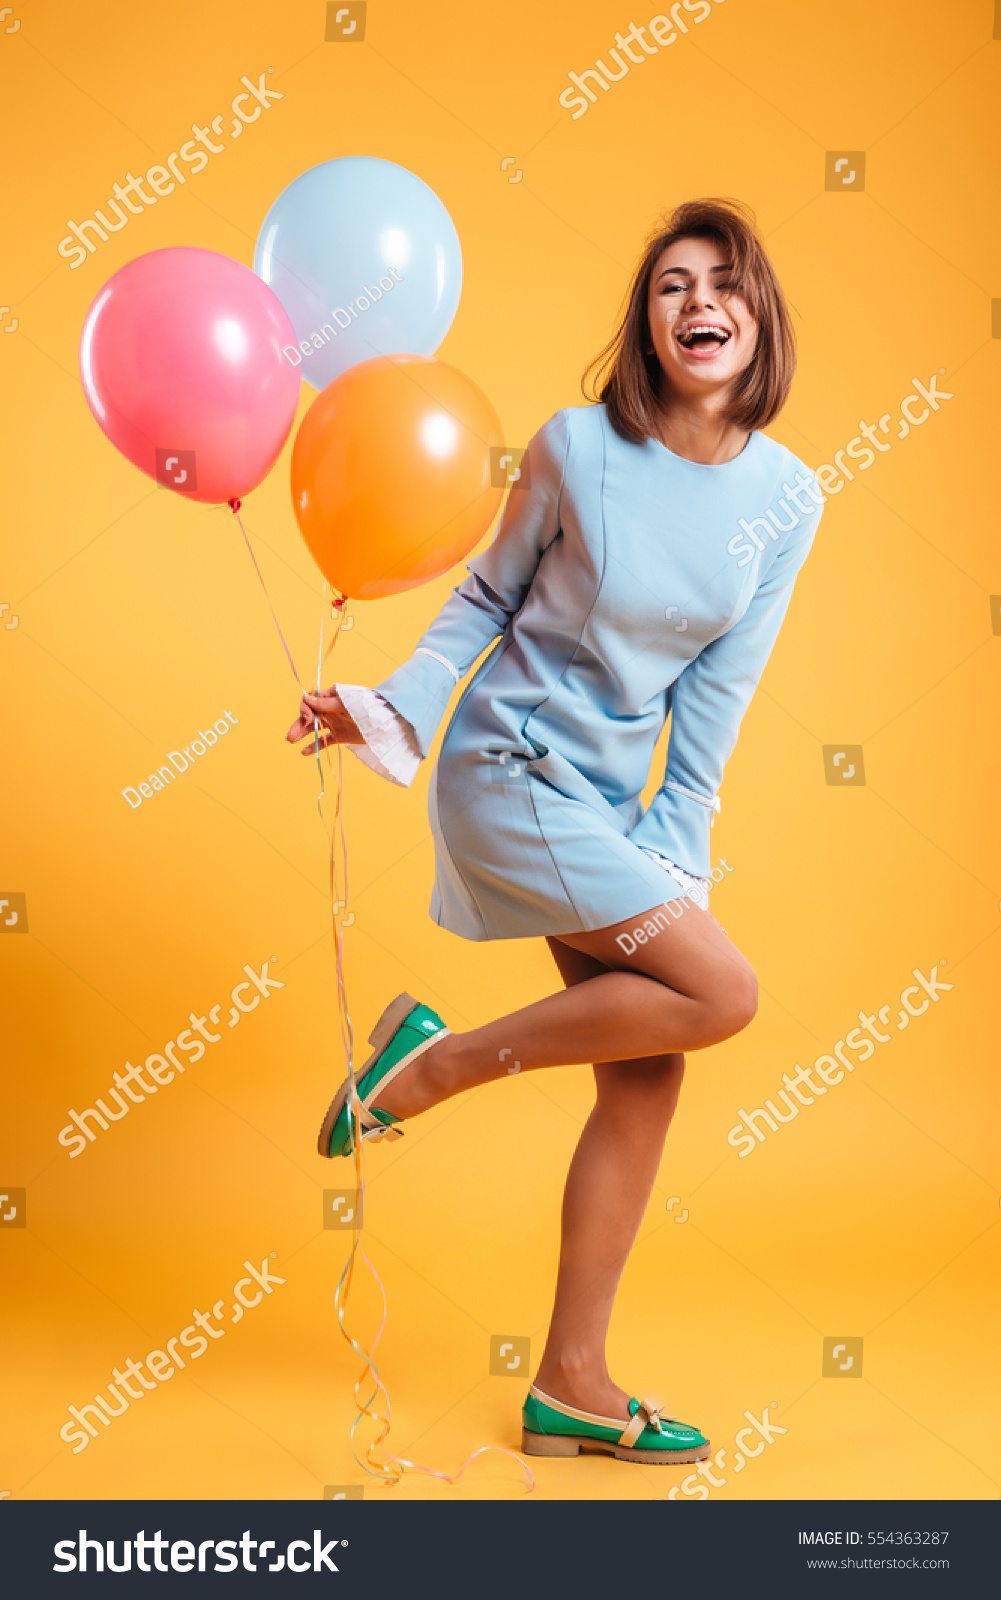 Full length of cheerful young woman with balloons standing and laughing #554363287